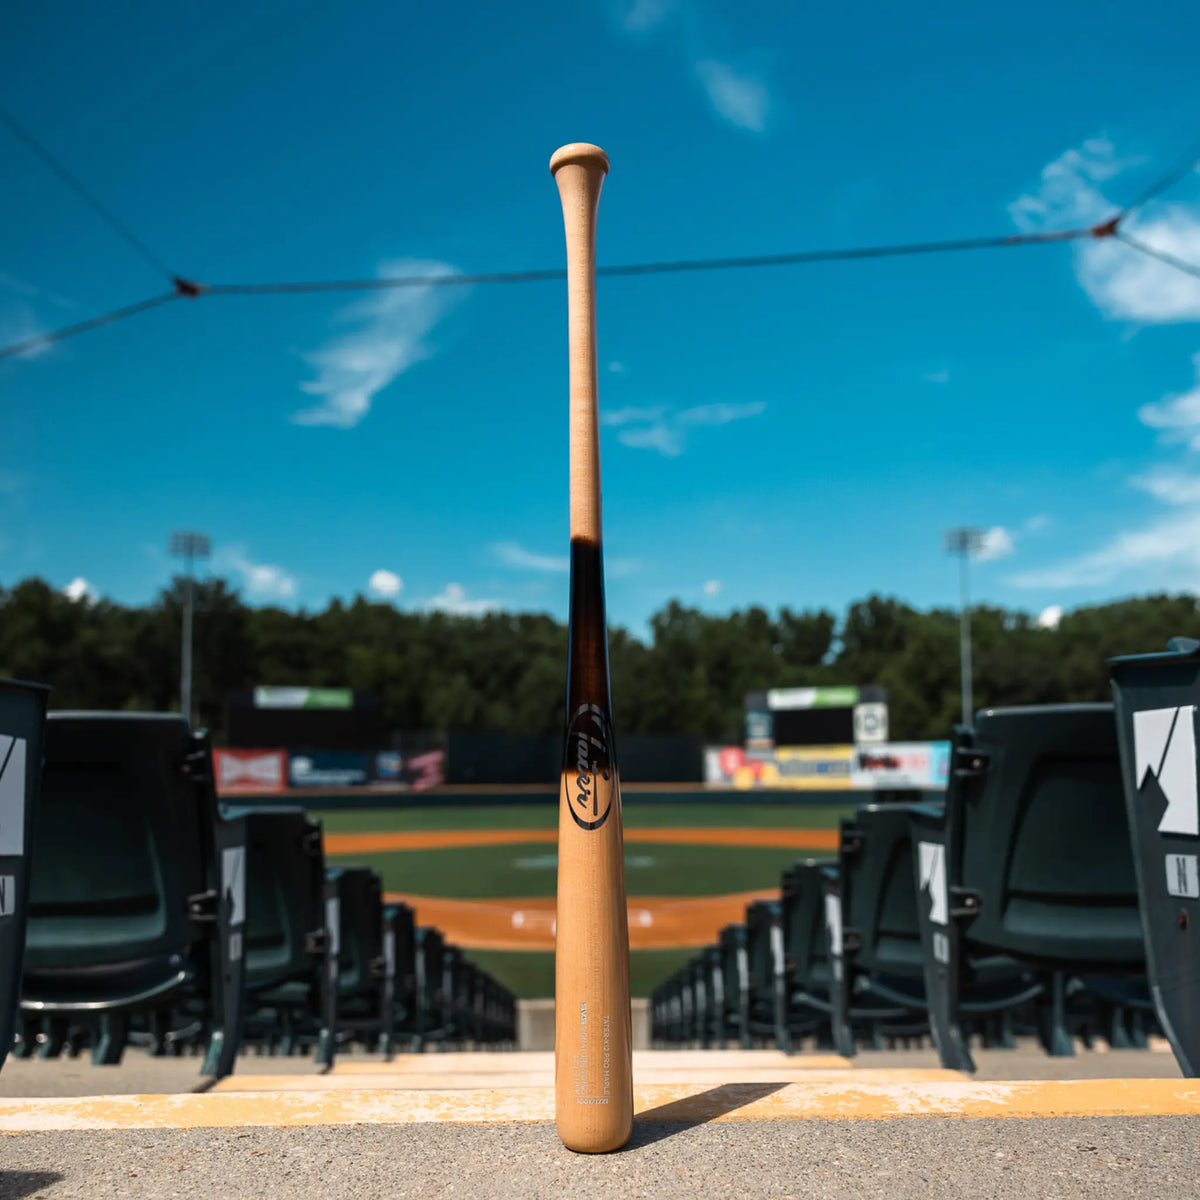 The image showcases a Tater X12 Pro Maple bat standing upright on the stands behind home plate, set against the backdrop of an empty baseball stadium under a vivid blue sky. The bat&#39;s natural finish and prominent Tater logo reflect the bat&#39;s quality.